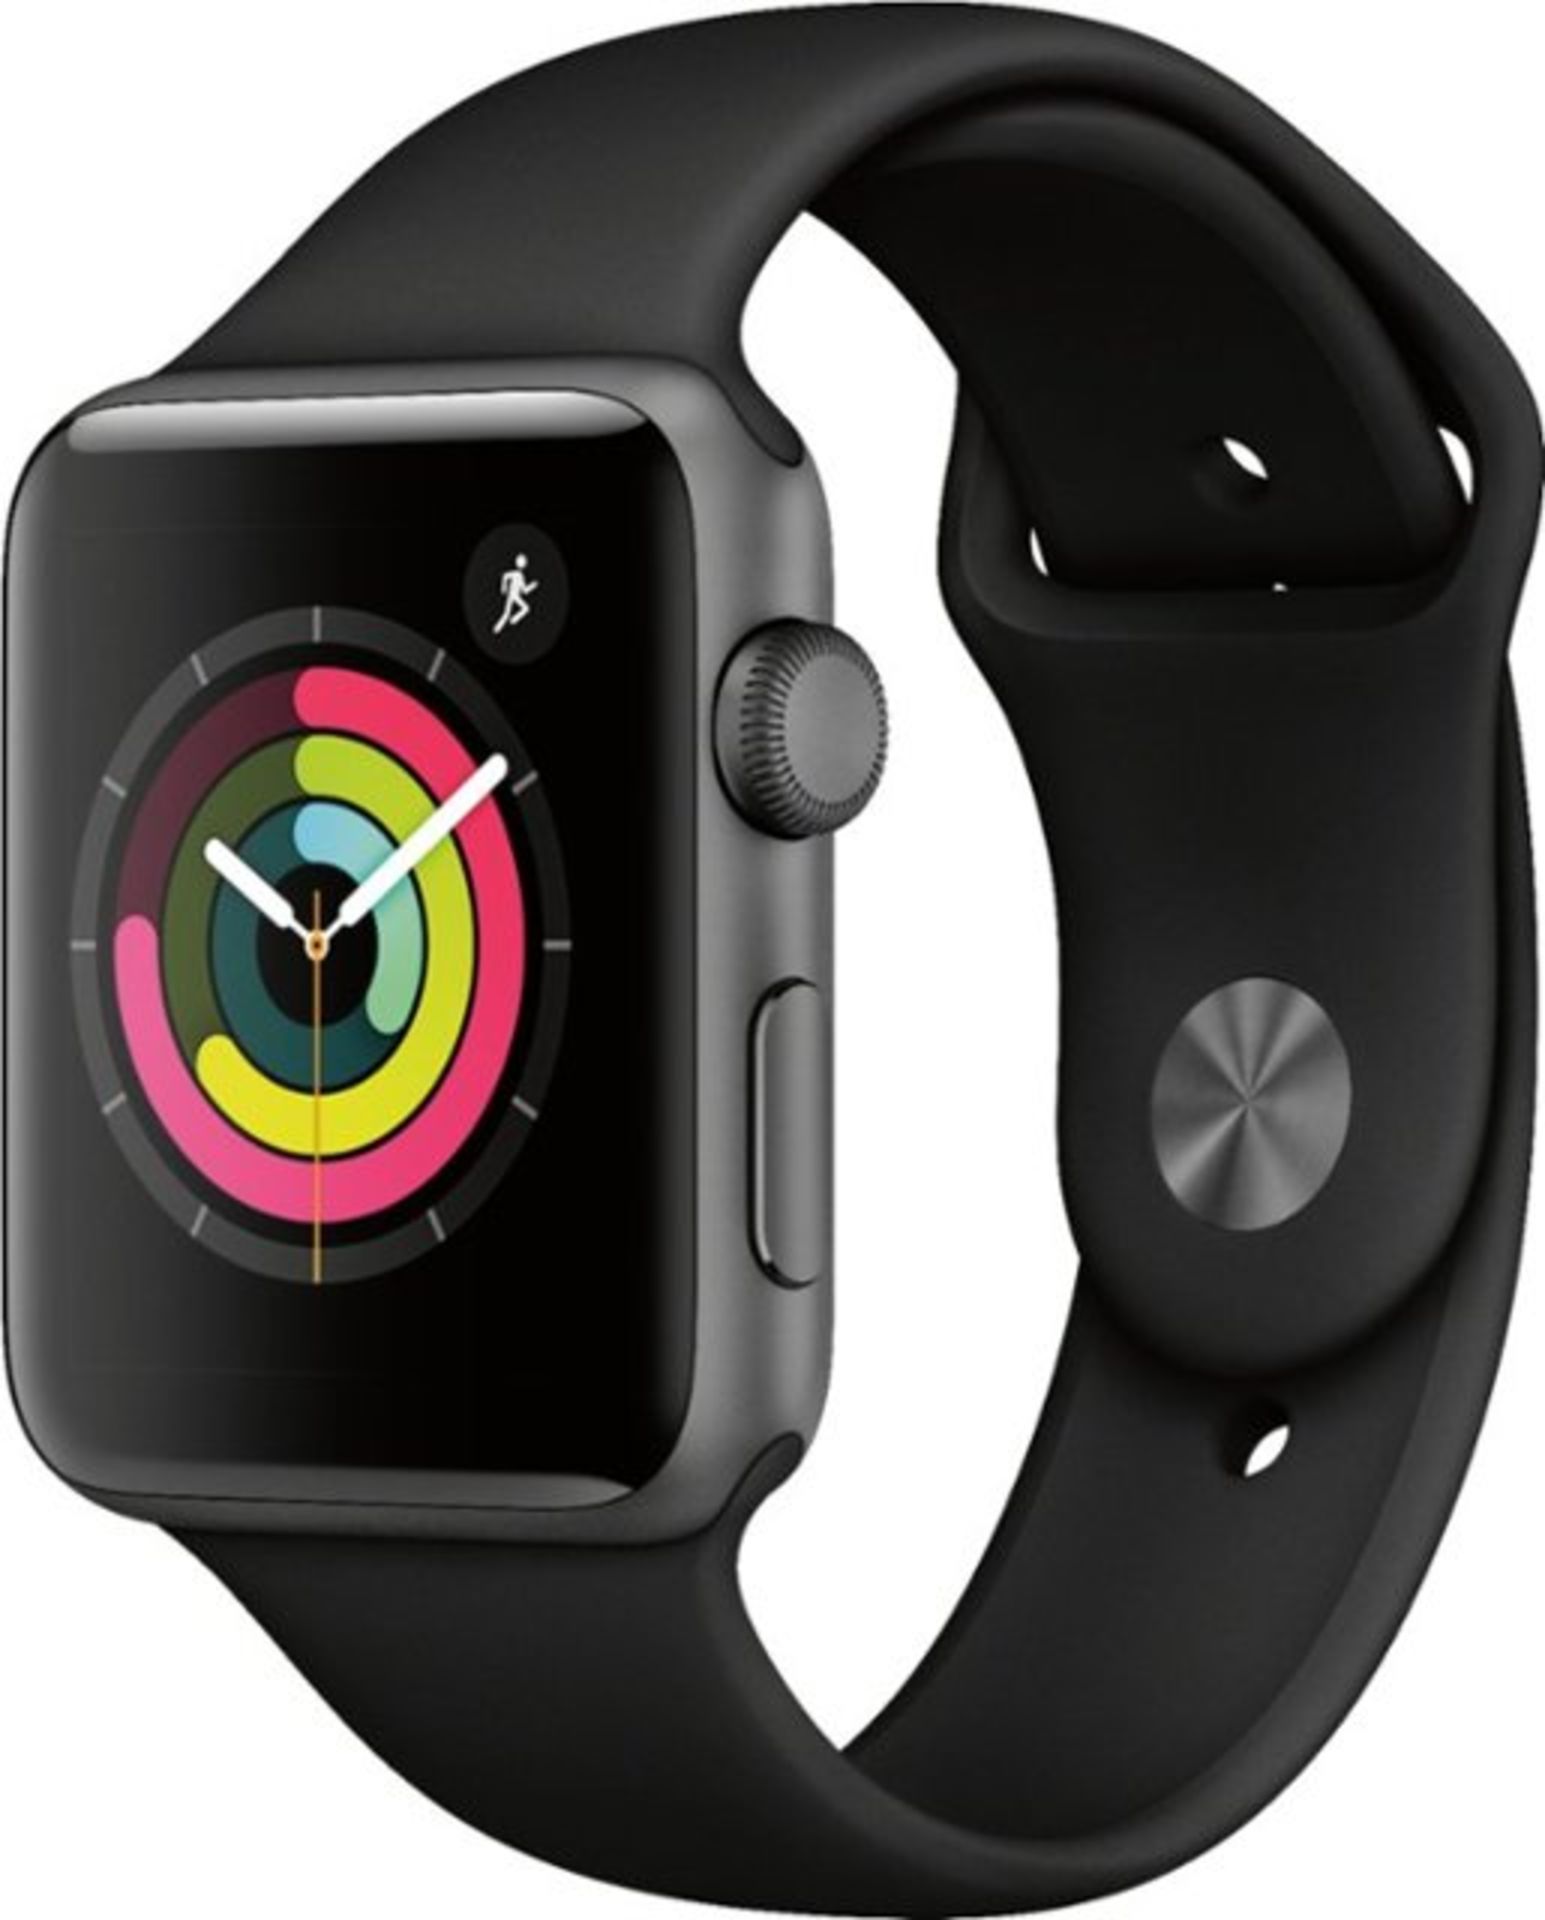 V Brand New Apple Watch Series 3 42mm Space Grey + Cellular (Brand New Accessories + Strap +